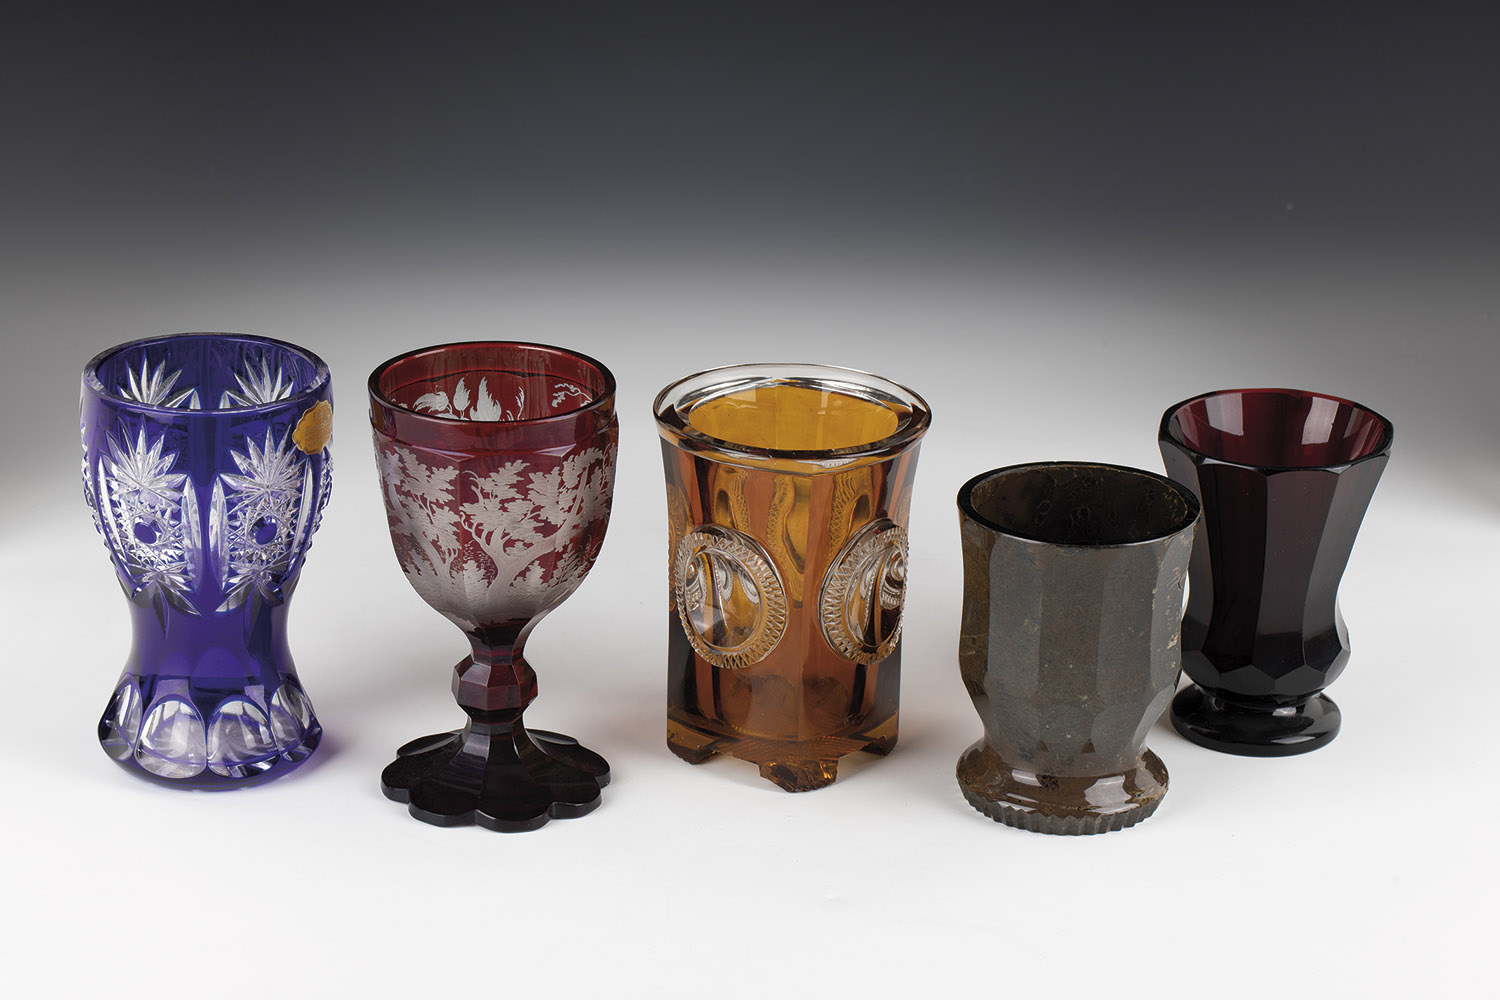 Mixed lot of five cups Bohemia 19th/20th century stone glass or colourless glass with glazes in red,